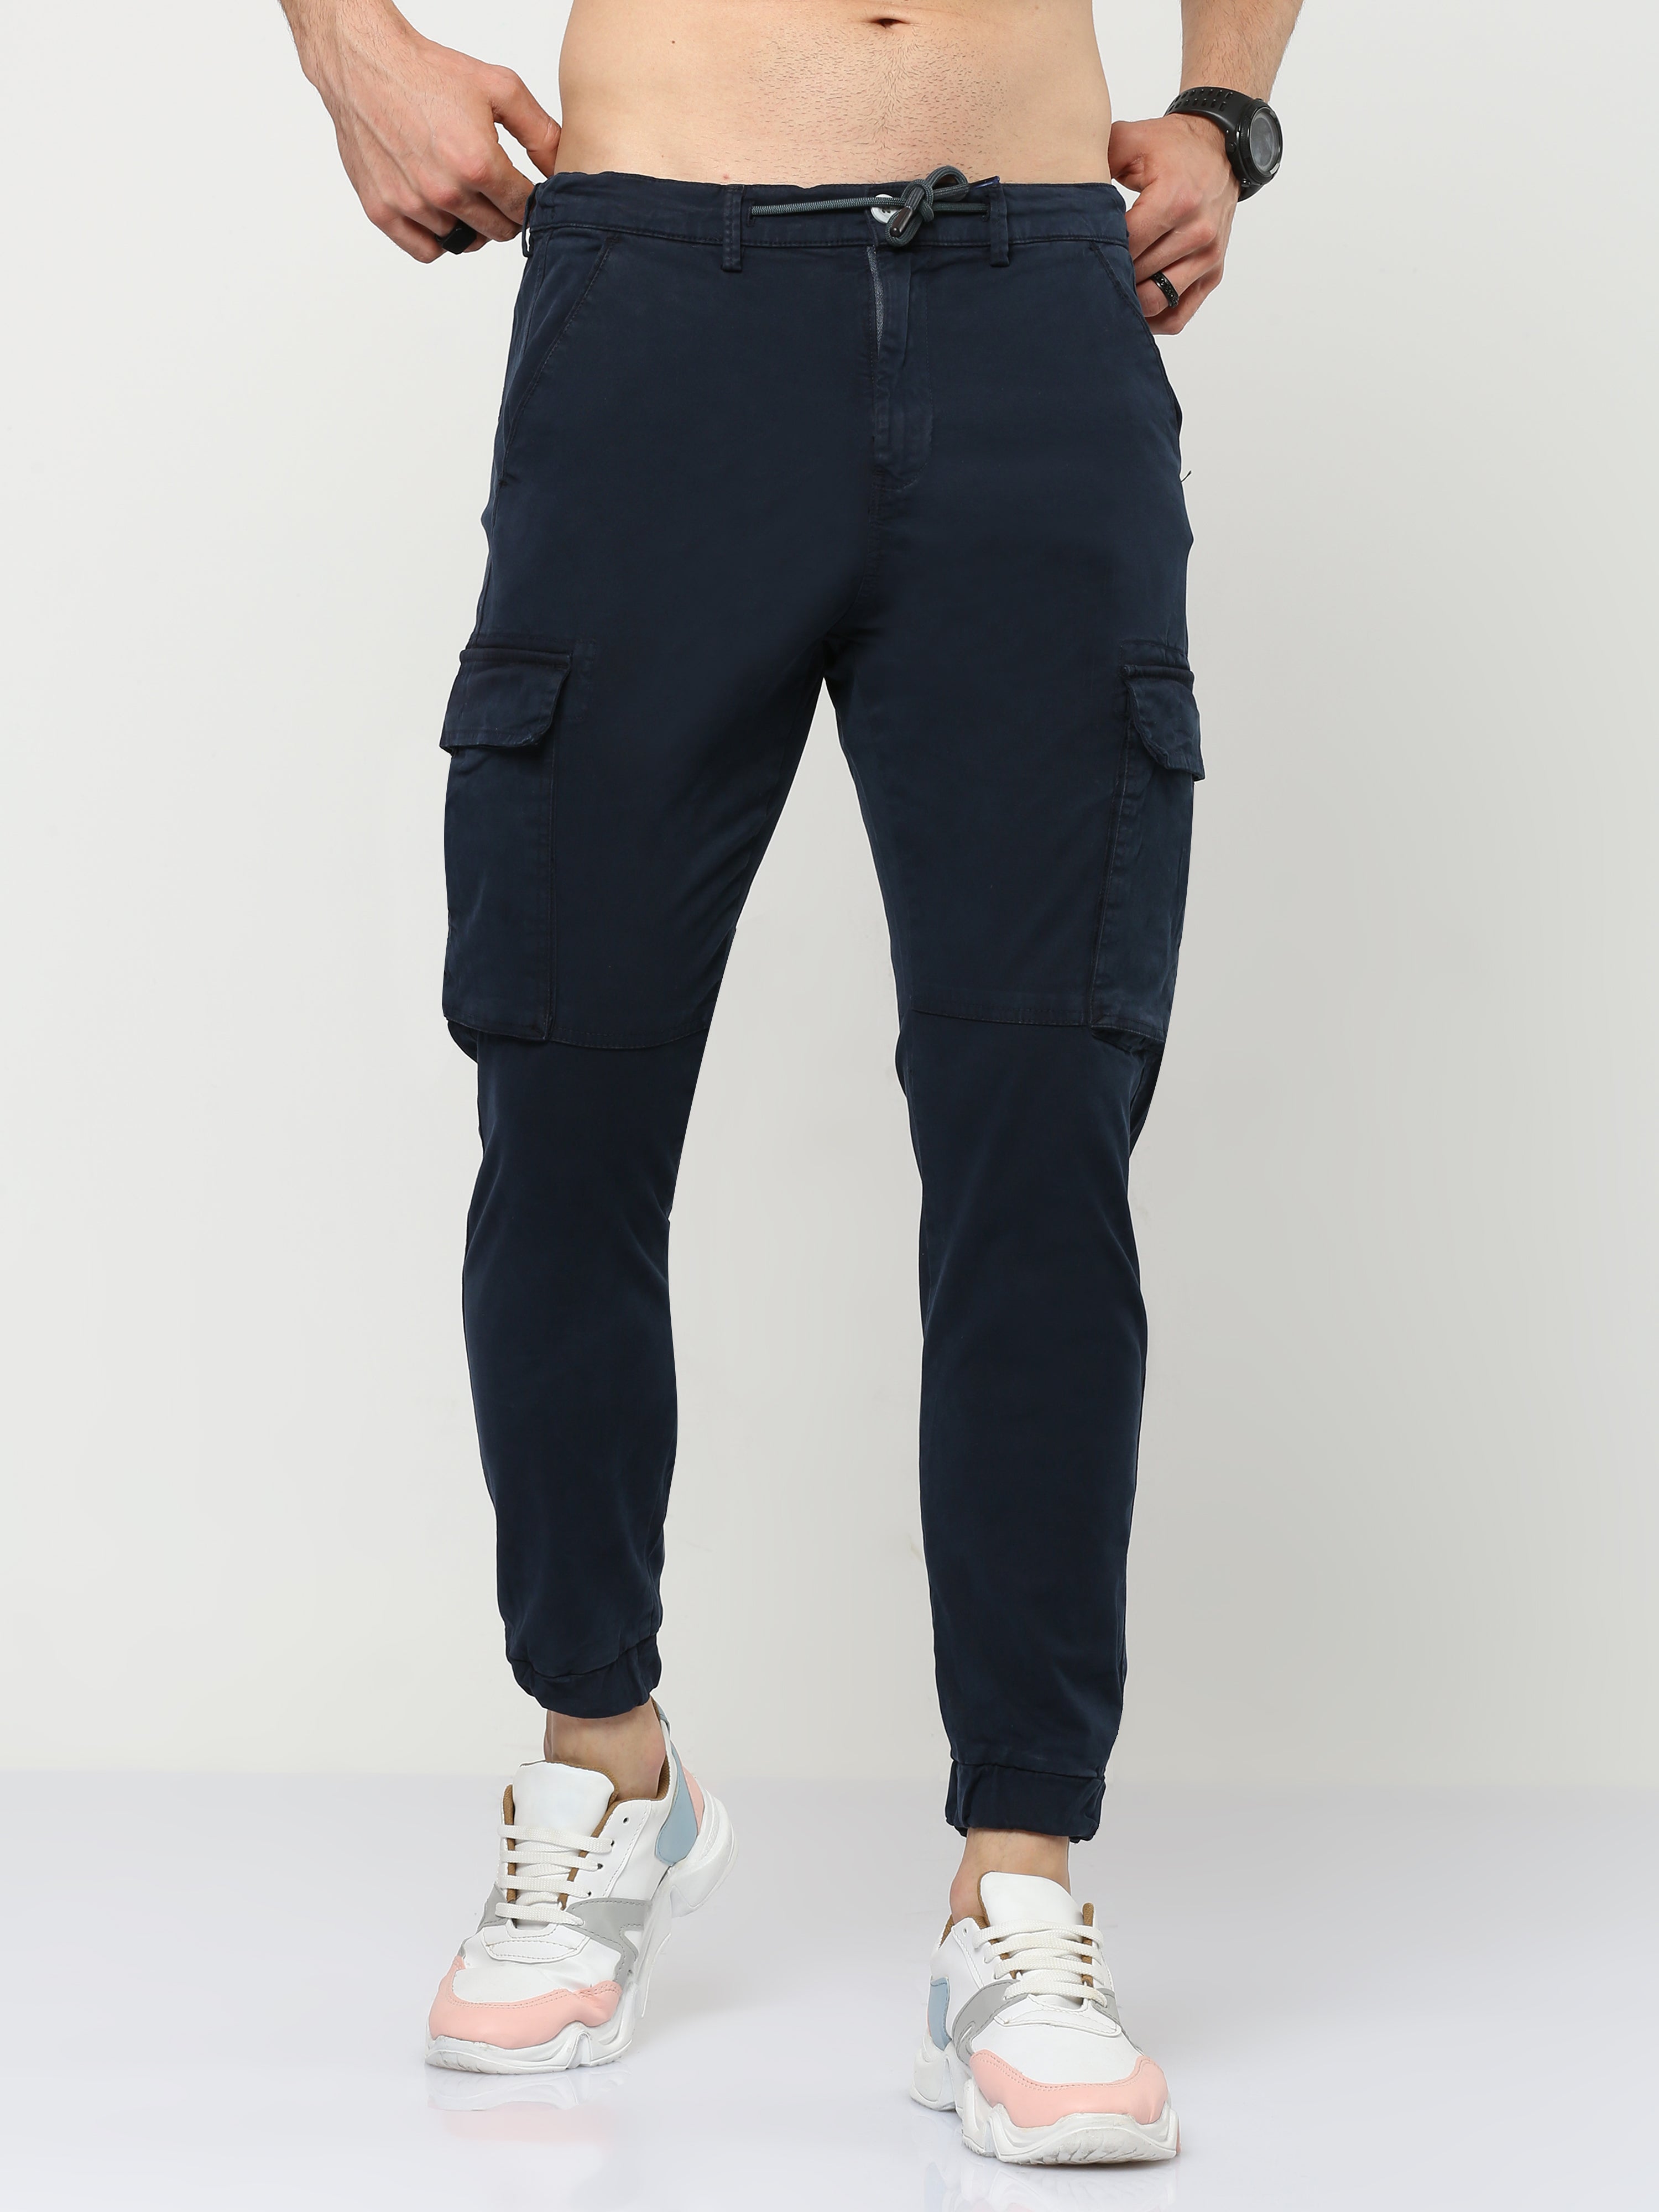 Buy Genre Over Navy Blue Cargo Pants Outfit – Address Apparels